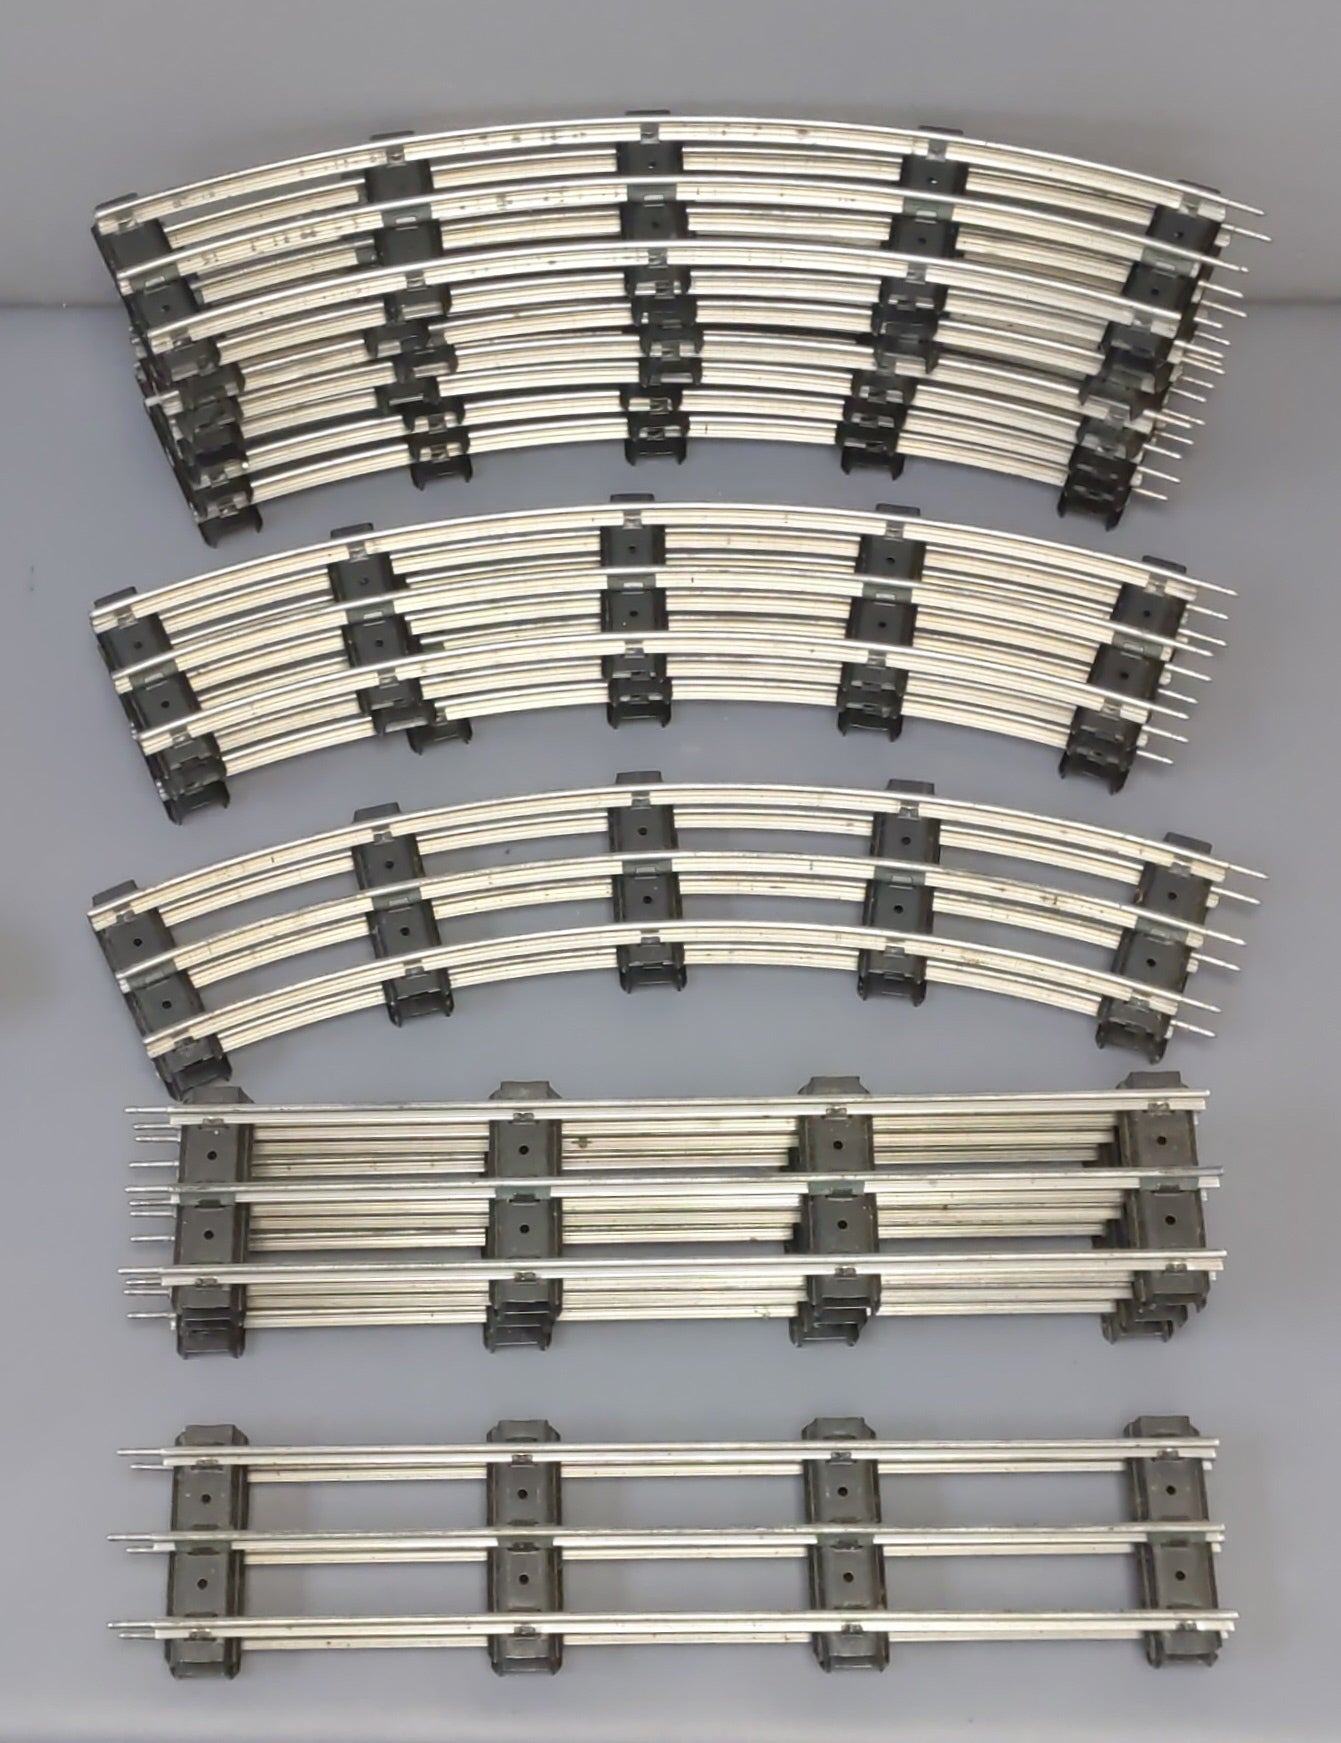 MTH & Other Standard Gauge Tubular Straight & Curved Track Sections [18] VG